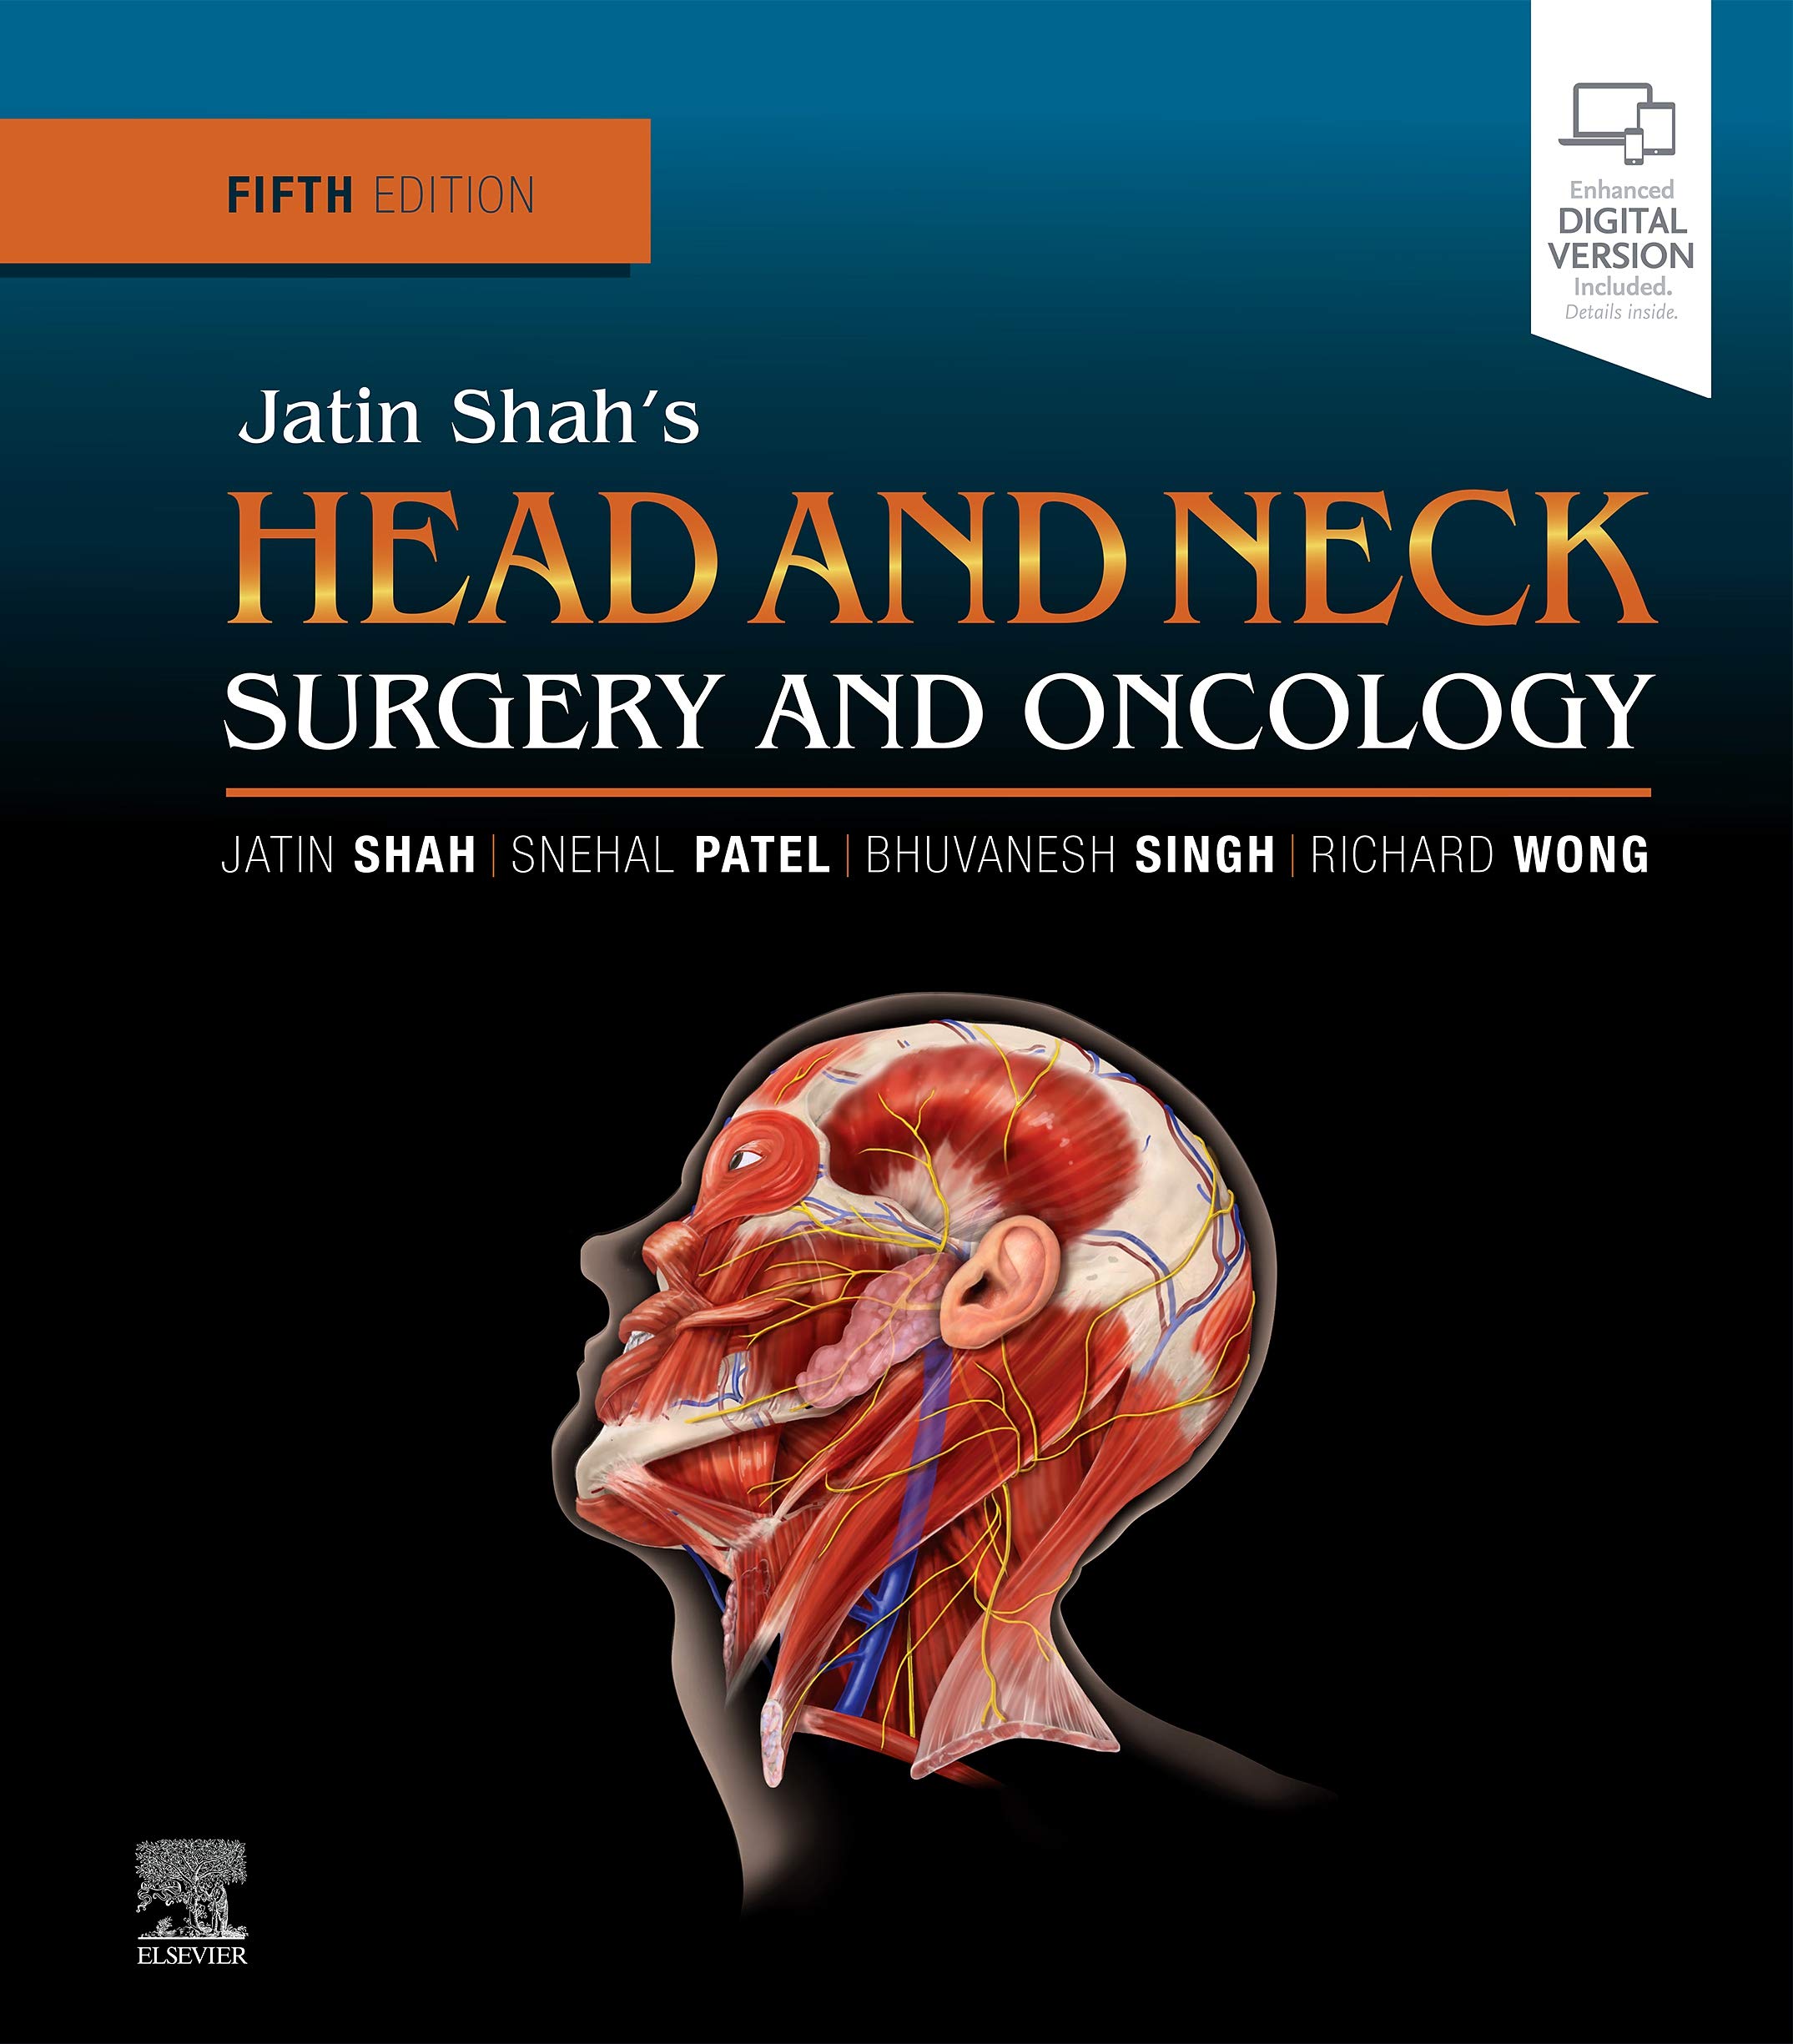 Jatin Shah's Head and Neck Surgery and Oncology: Expert Consult